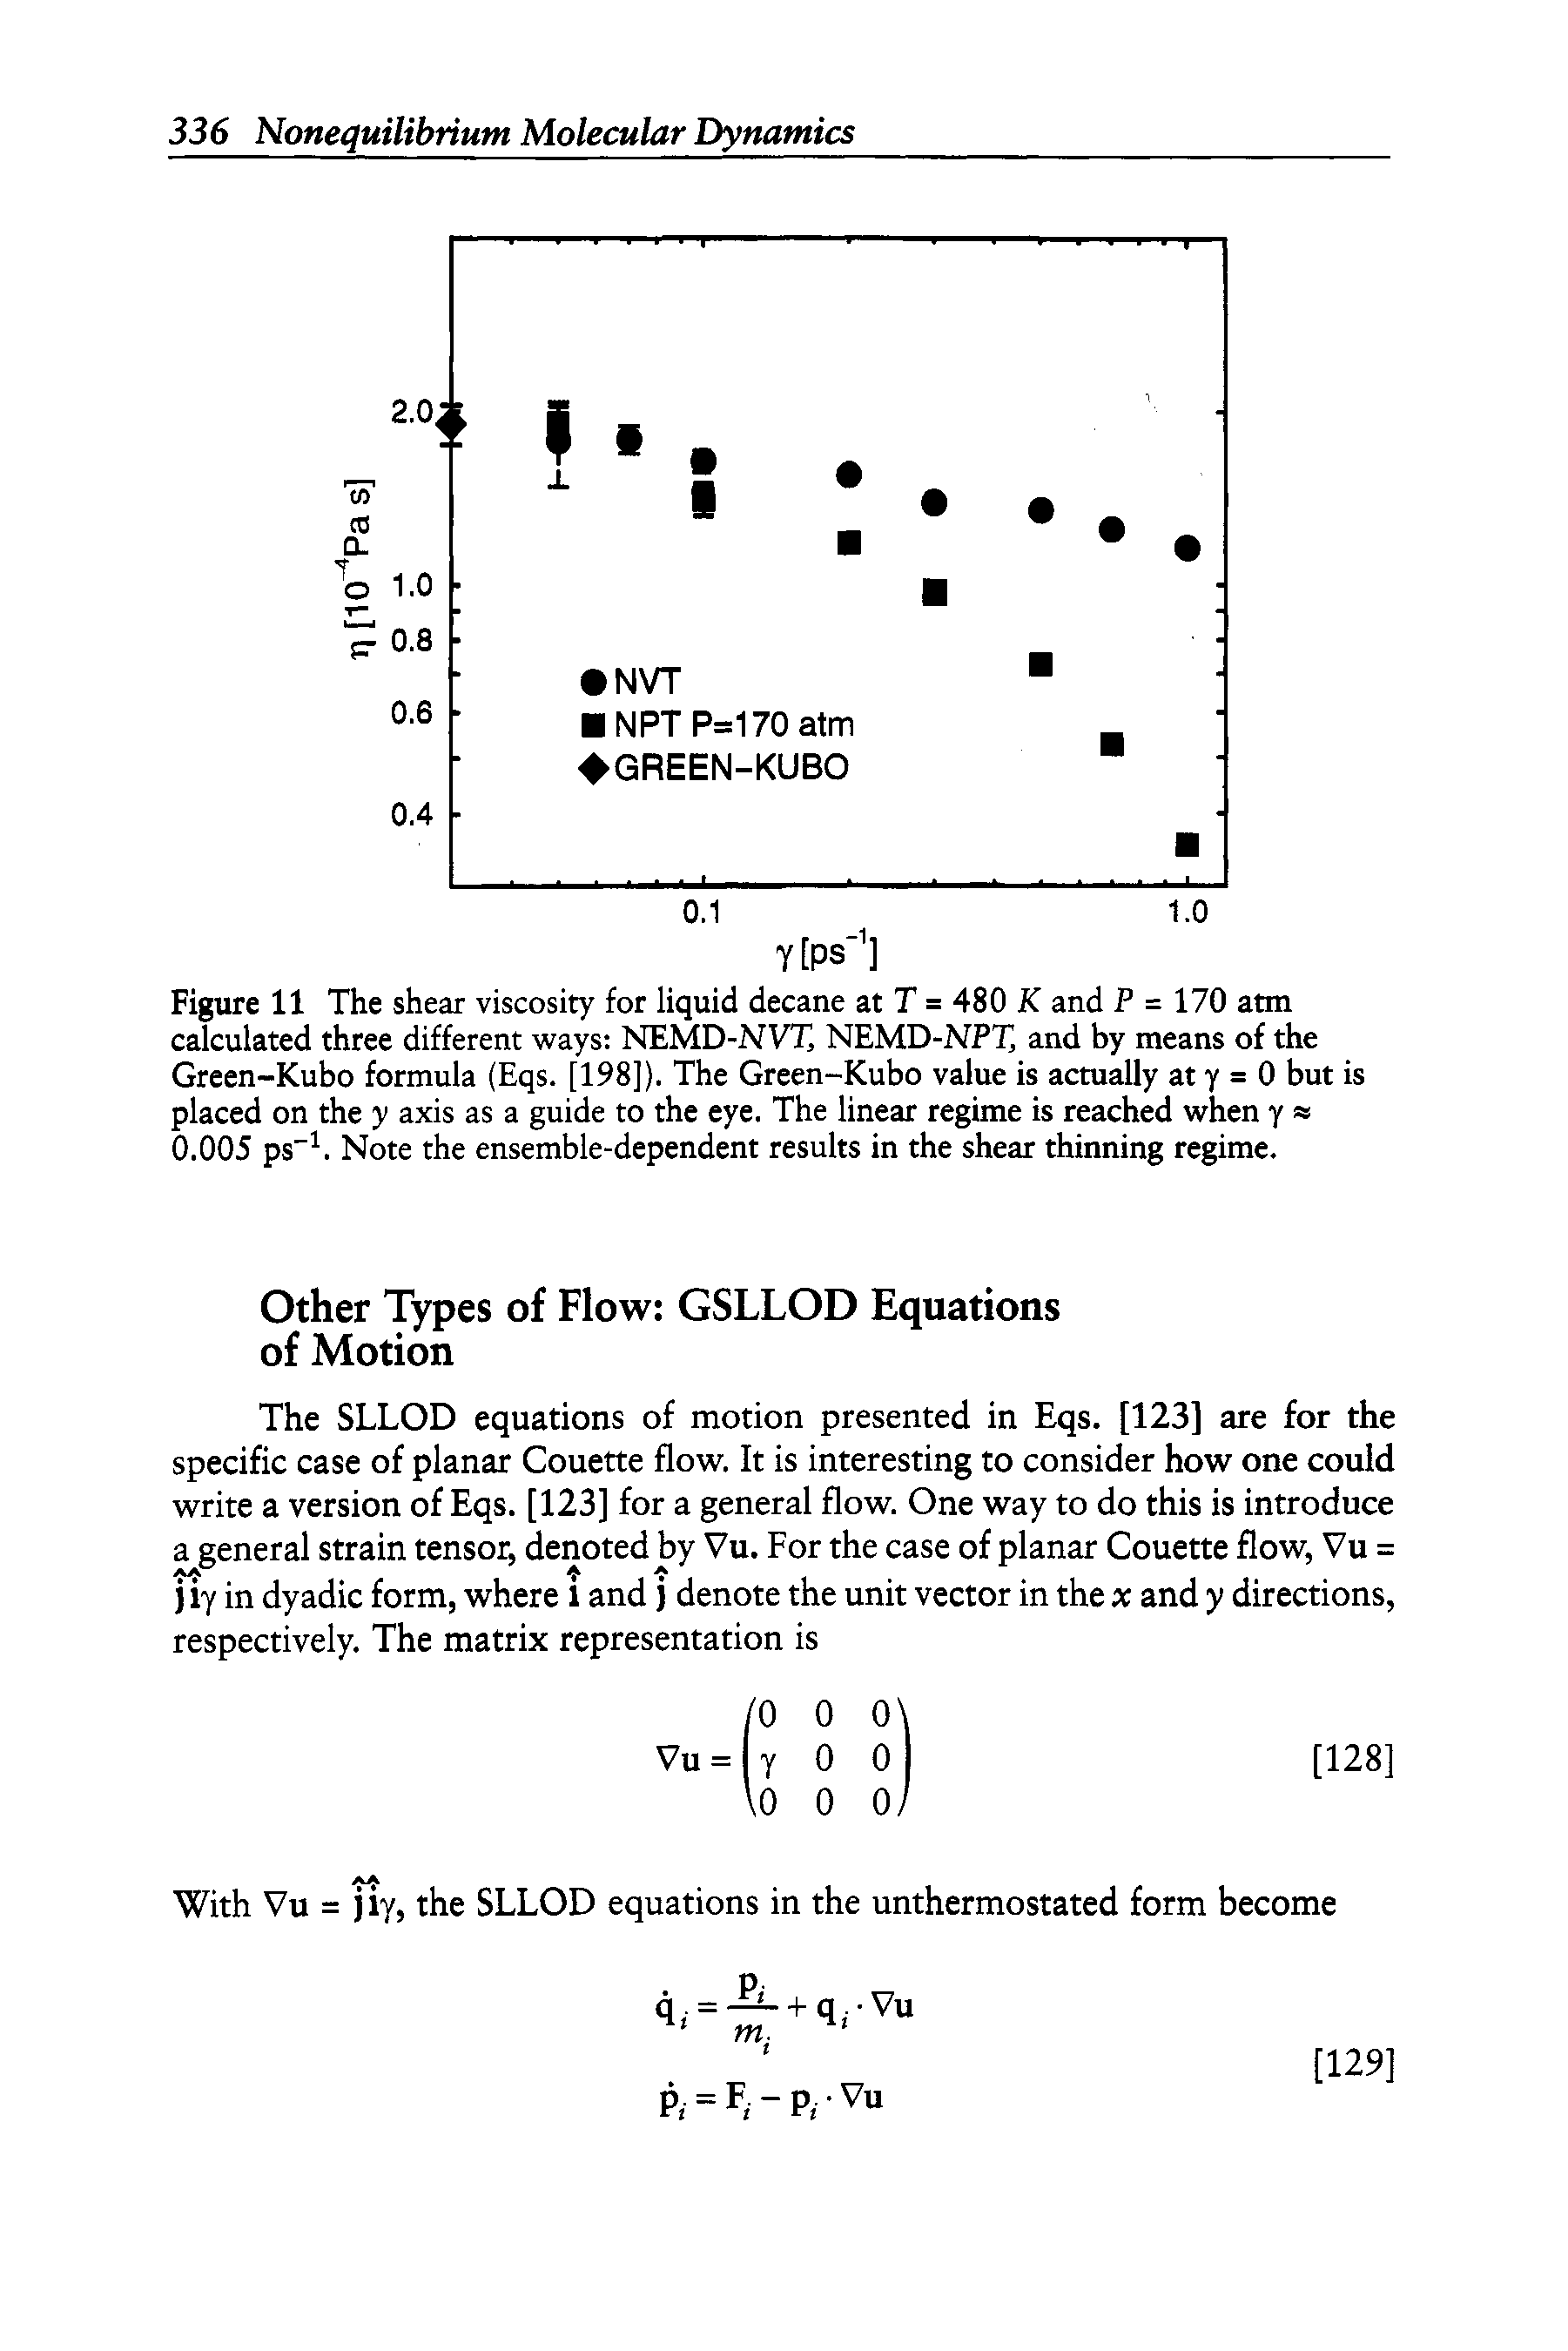 Figure 11 The shear viscosity for liquid decane at T = 480 K and P = 170 atm calculated three different ways NEMD-NVT, NEMD-NPX and by means of the Green-Kubo formula (Eqs. [198]). The Green-Kubo value is actually at y = 0 but is placed on the y axis as a guide to the eye. The linear regime is reached when y 0.005 ps". Note the ensemble-dependent results in the shear thinning regime.